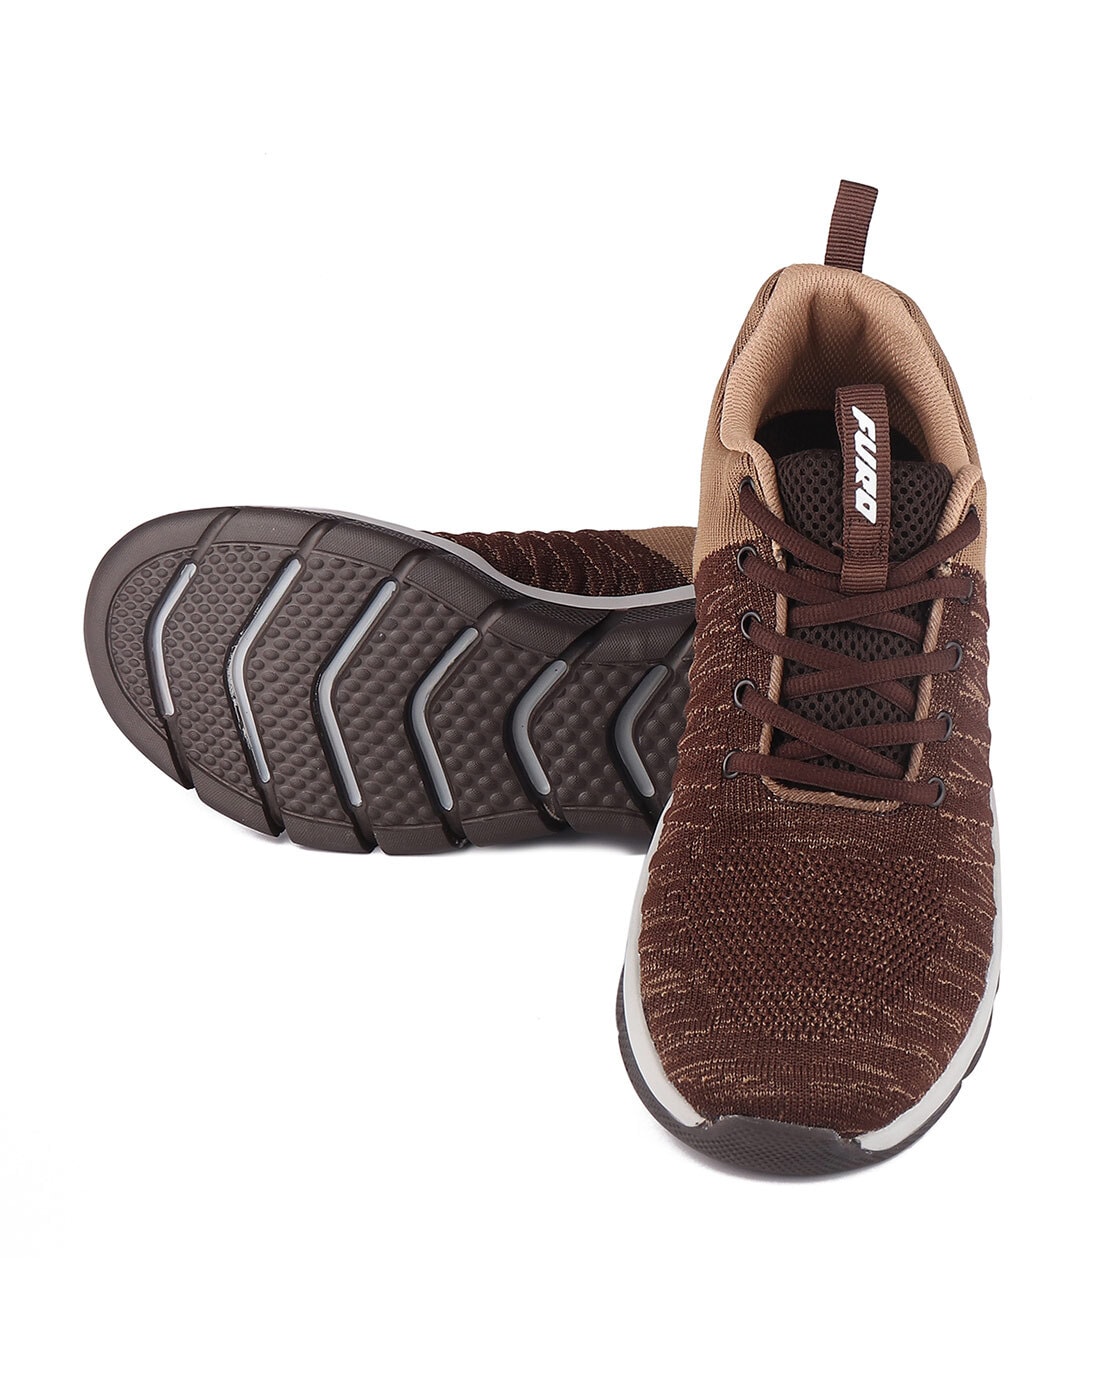 Brown Rubber Shoe Soles at Rs 100/piece, Kanpur